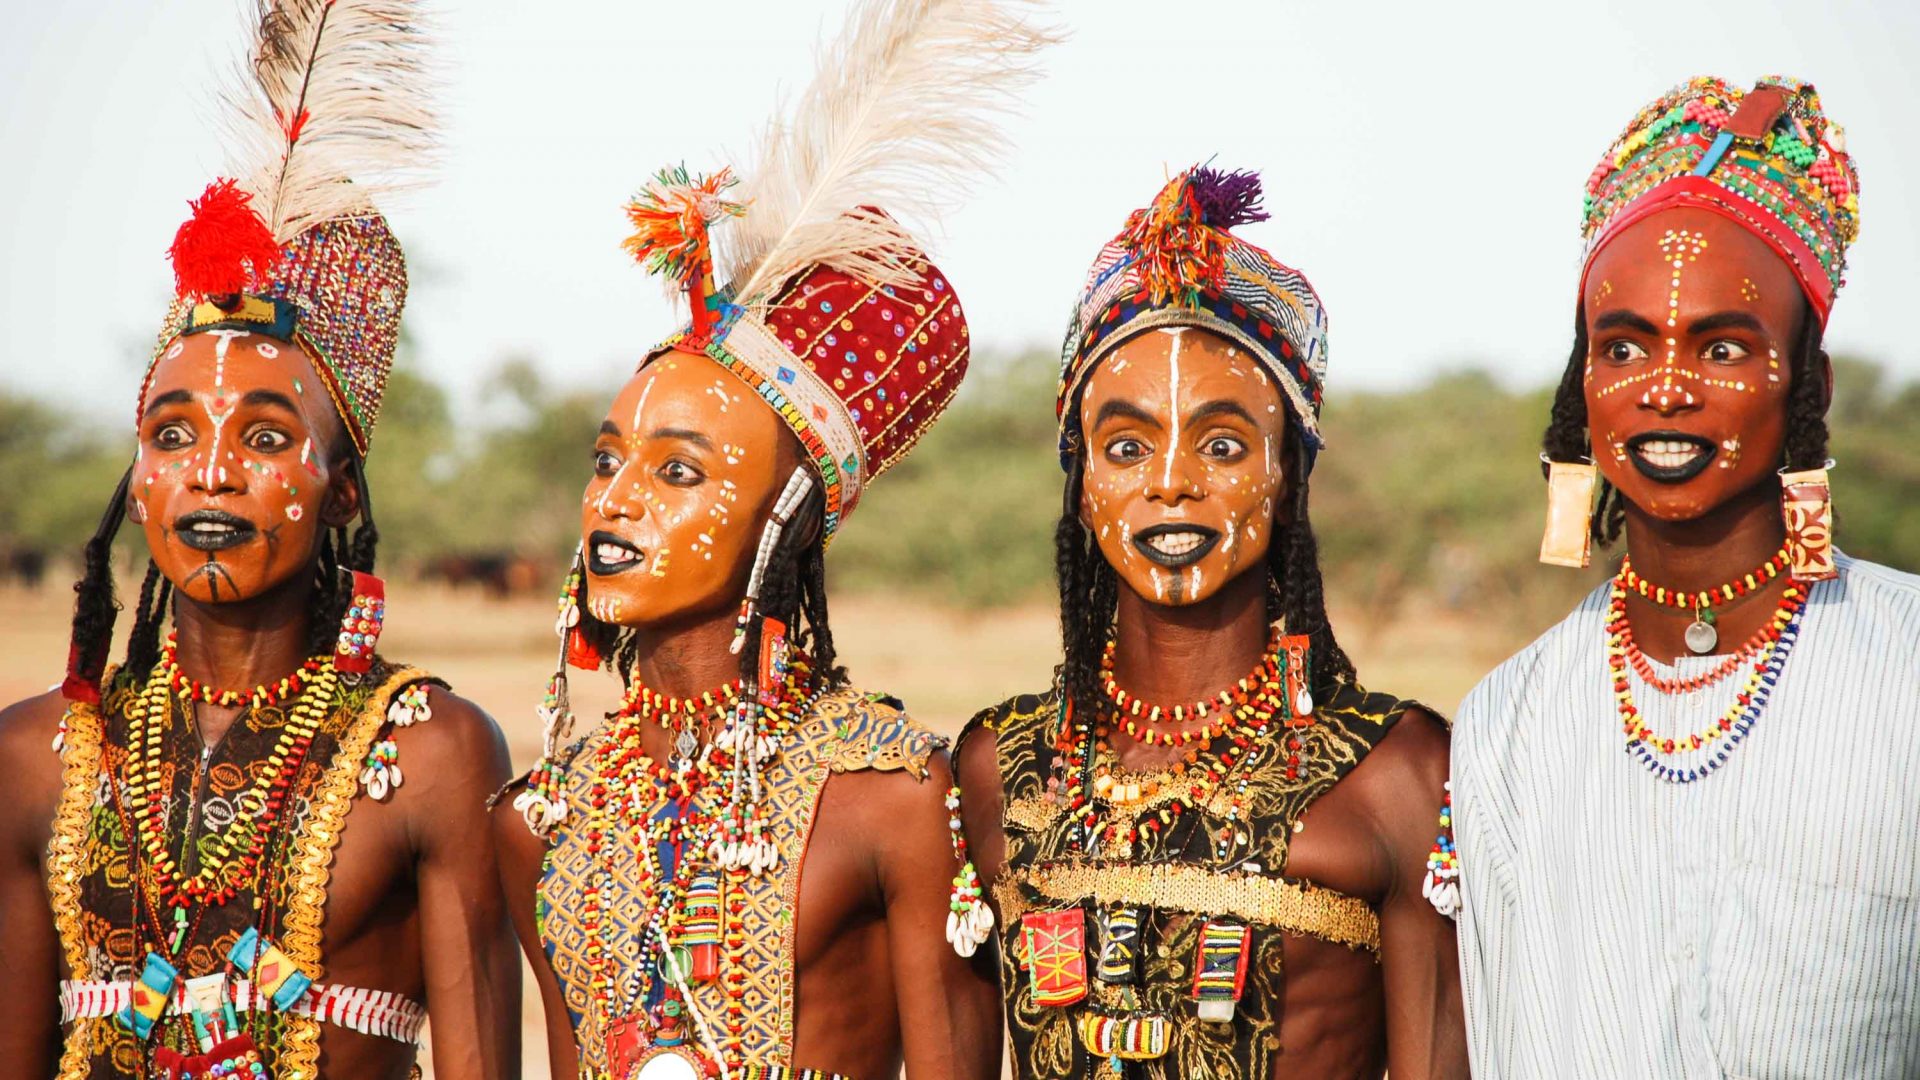 Three men adorned in necklaces and headdresses.